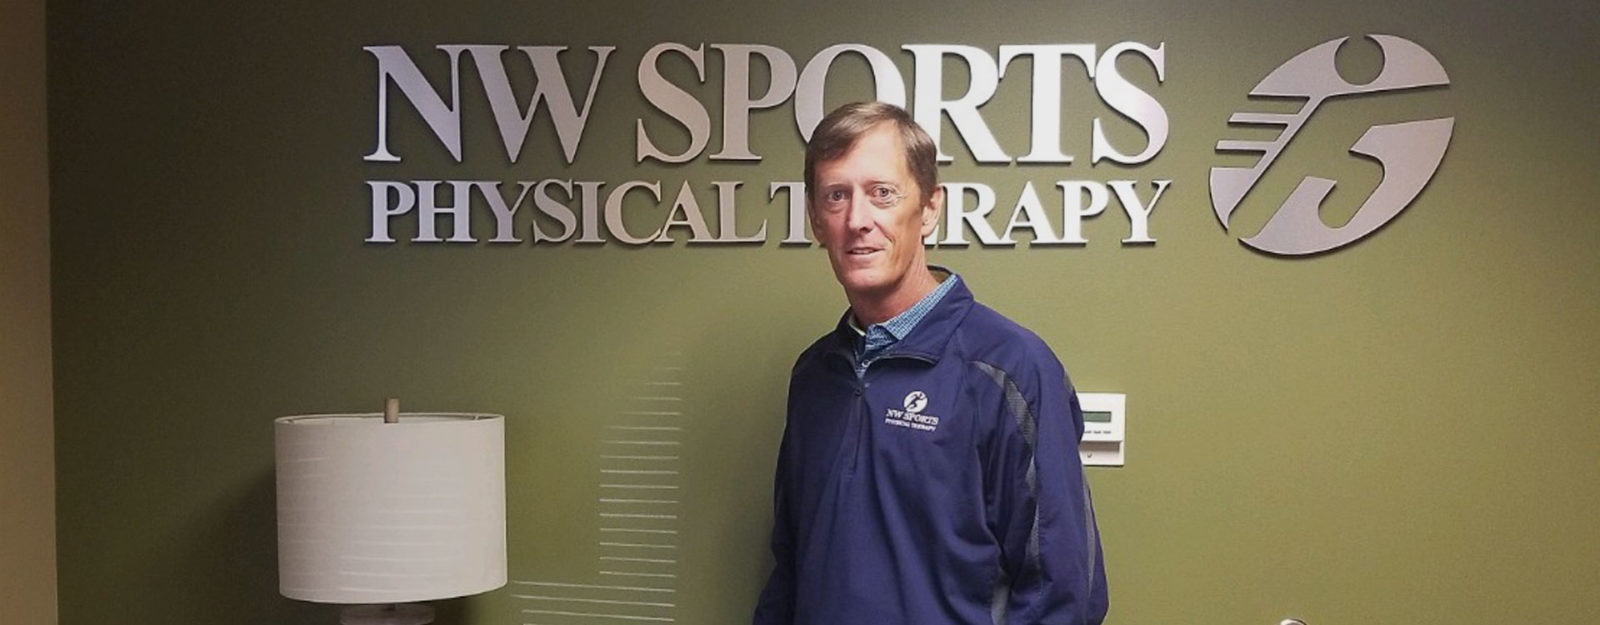 man standing in front of NW Sports Physical Therapy sign